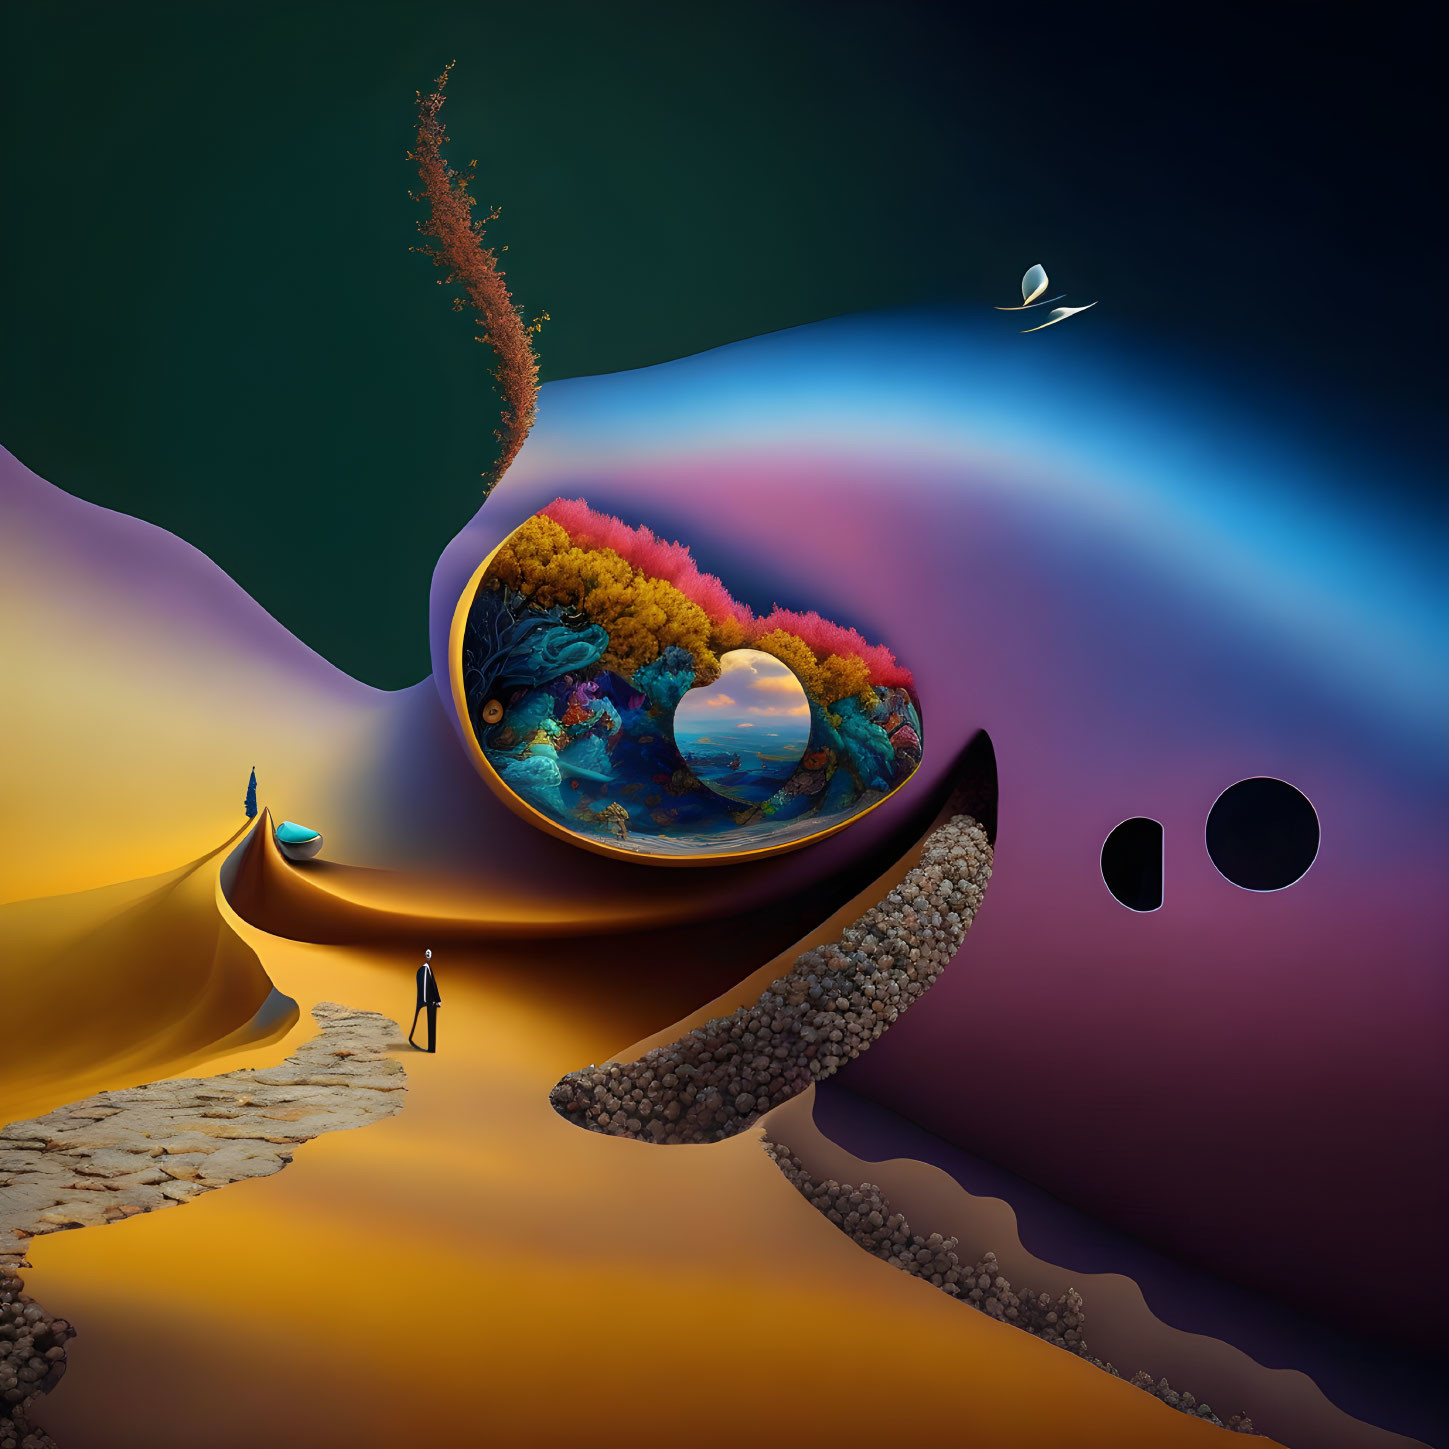 Vibrant surreal landscape with person, pathway, colorful sphere, ecosystem, boat, and bird.